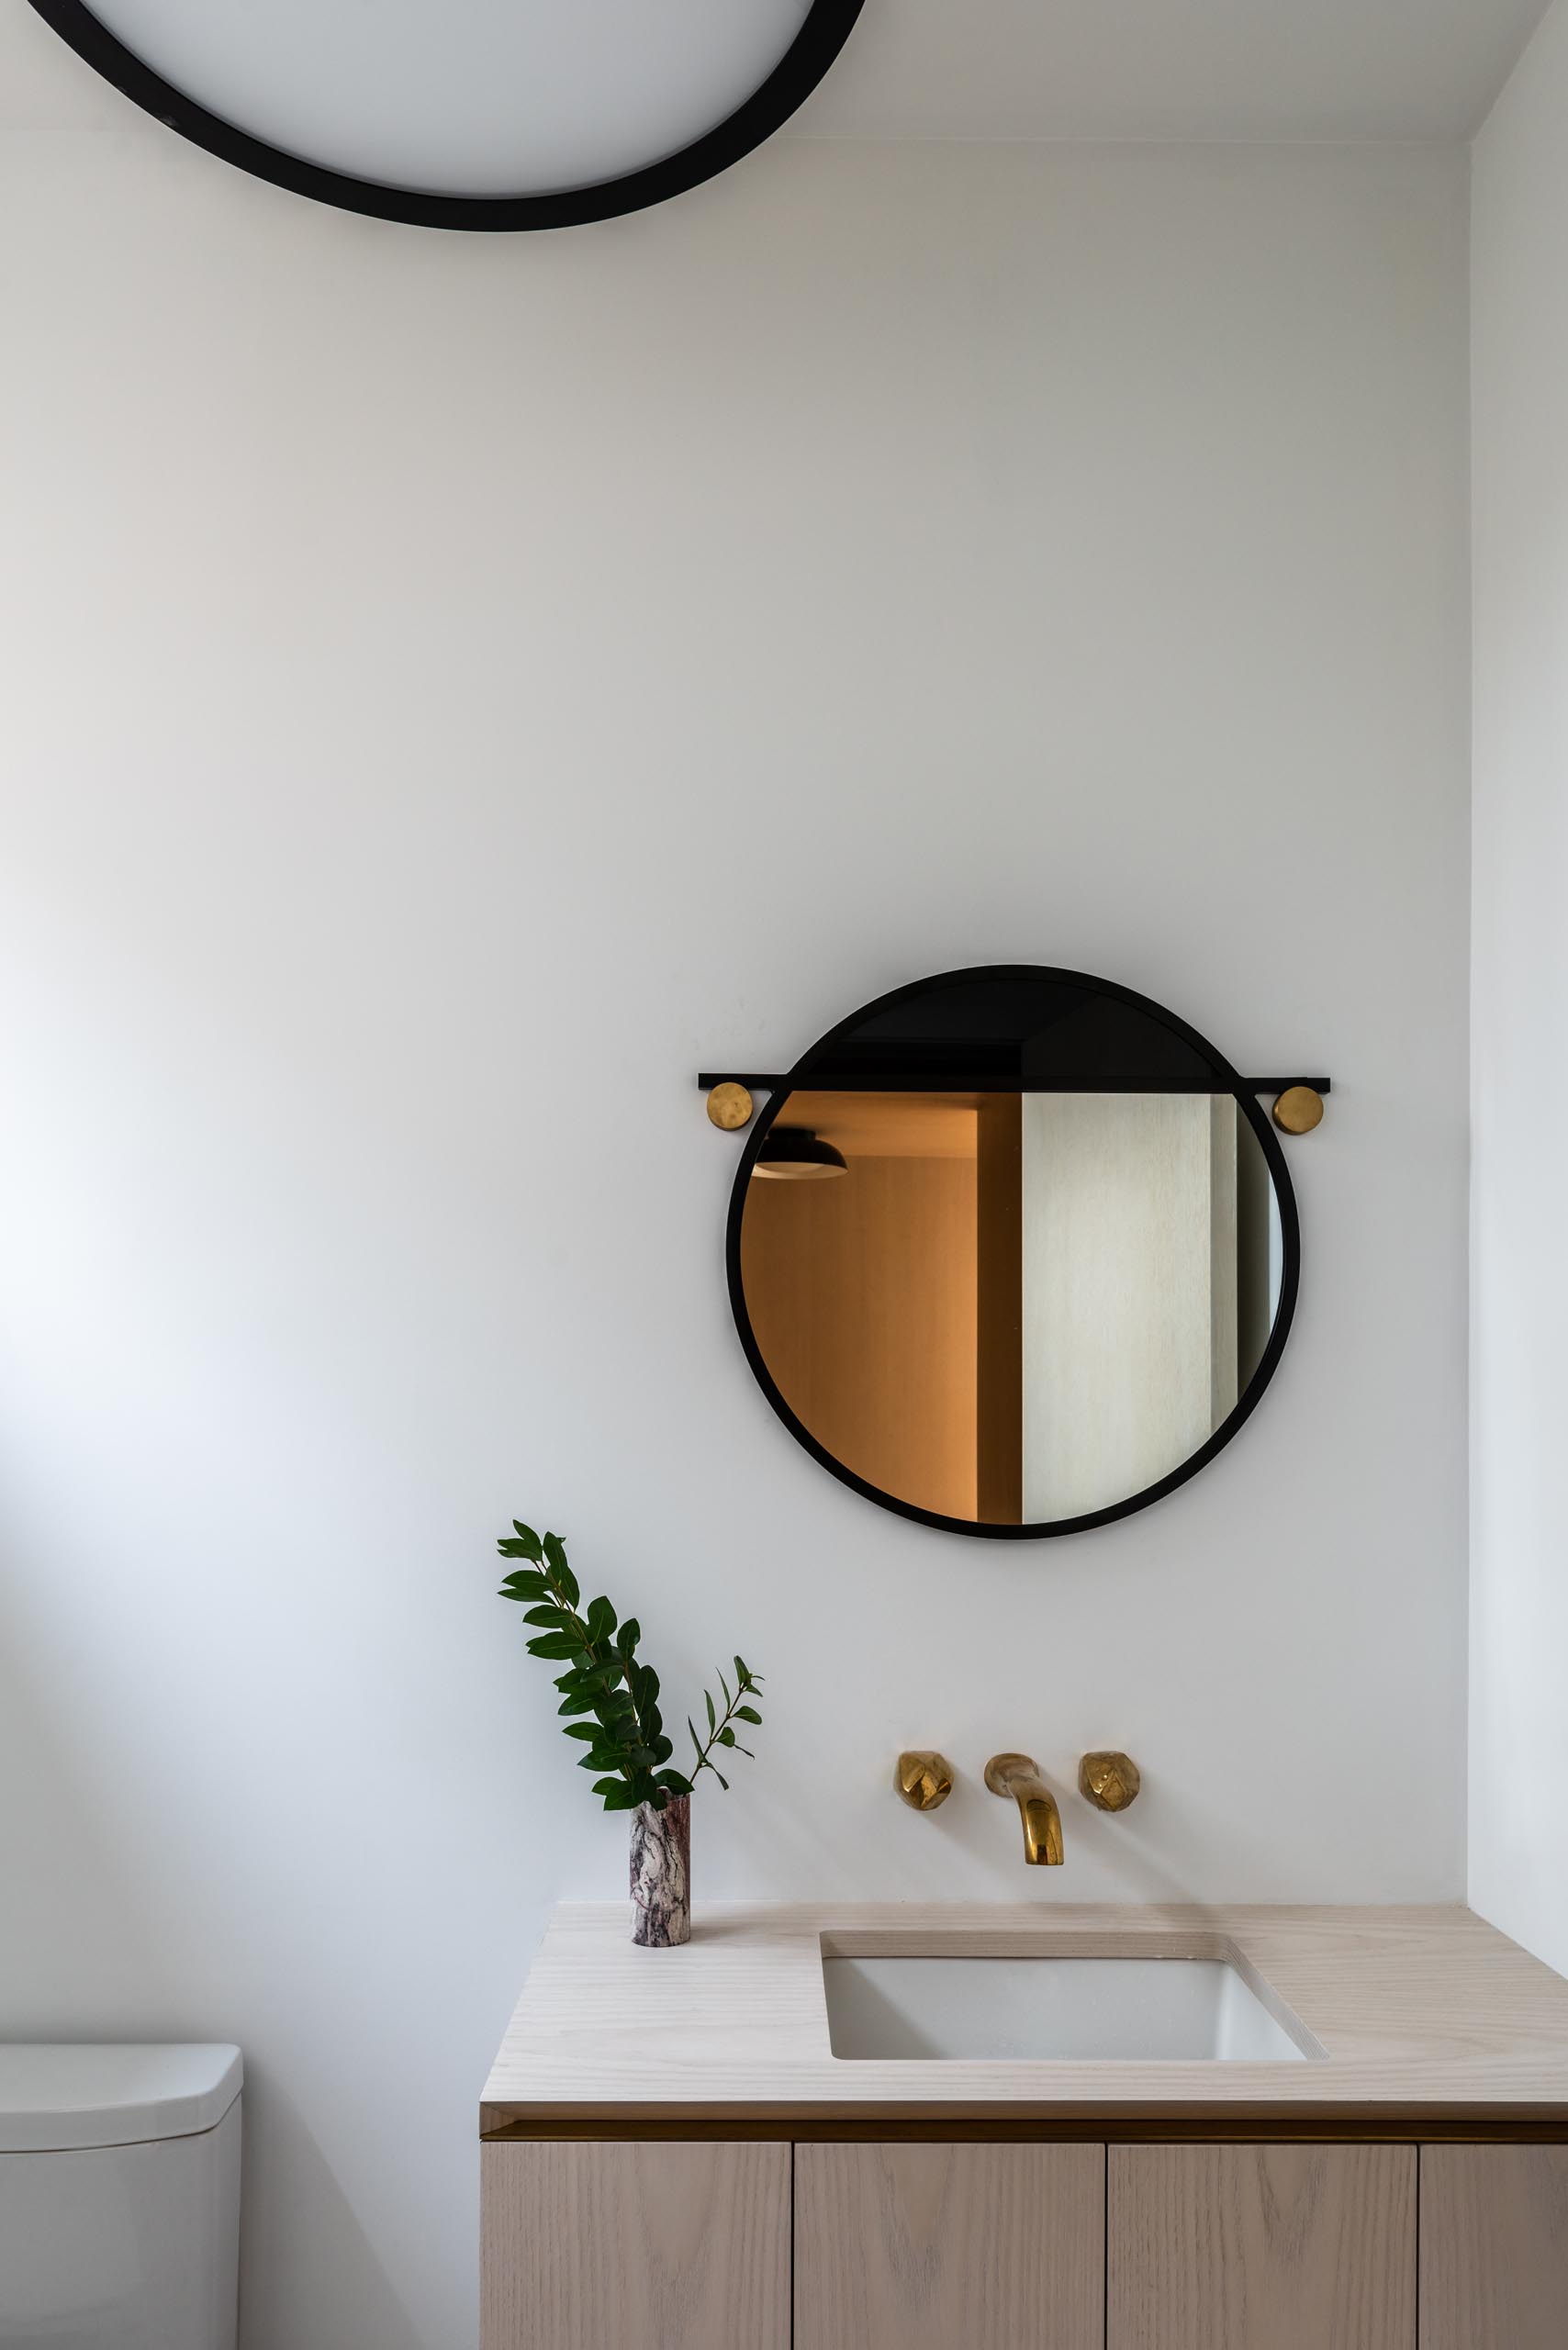 In this modern bathroom, the focus is the round mirror with a thick black frame that hangs above a light wood vanity with an undermount sink.